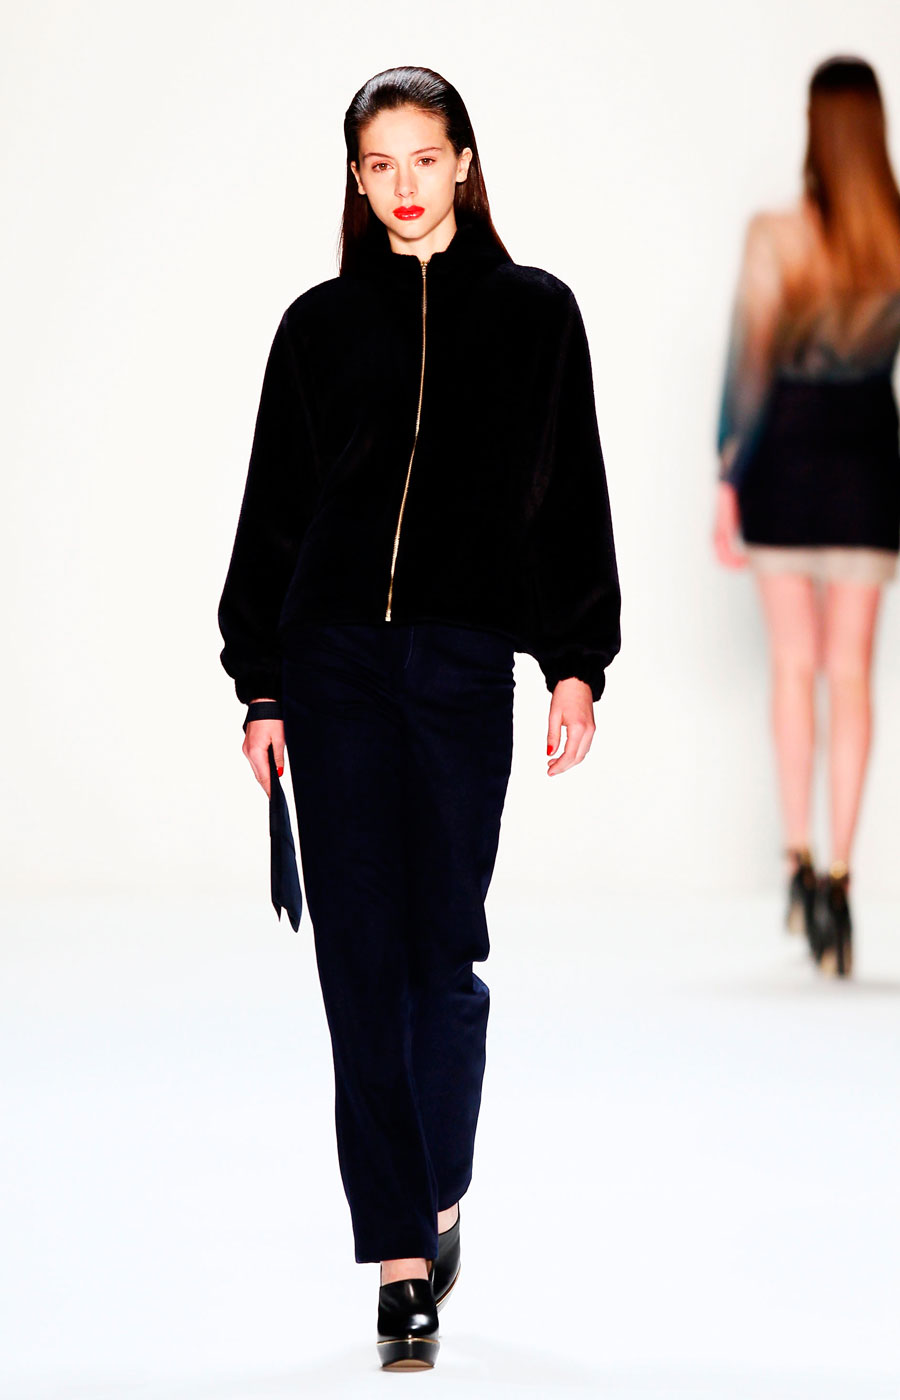 AW 2013 by Hien Le (15)